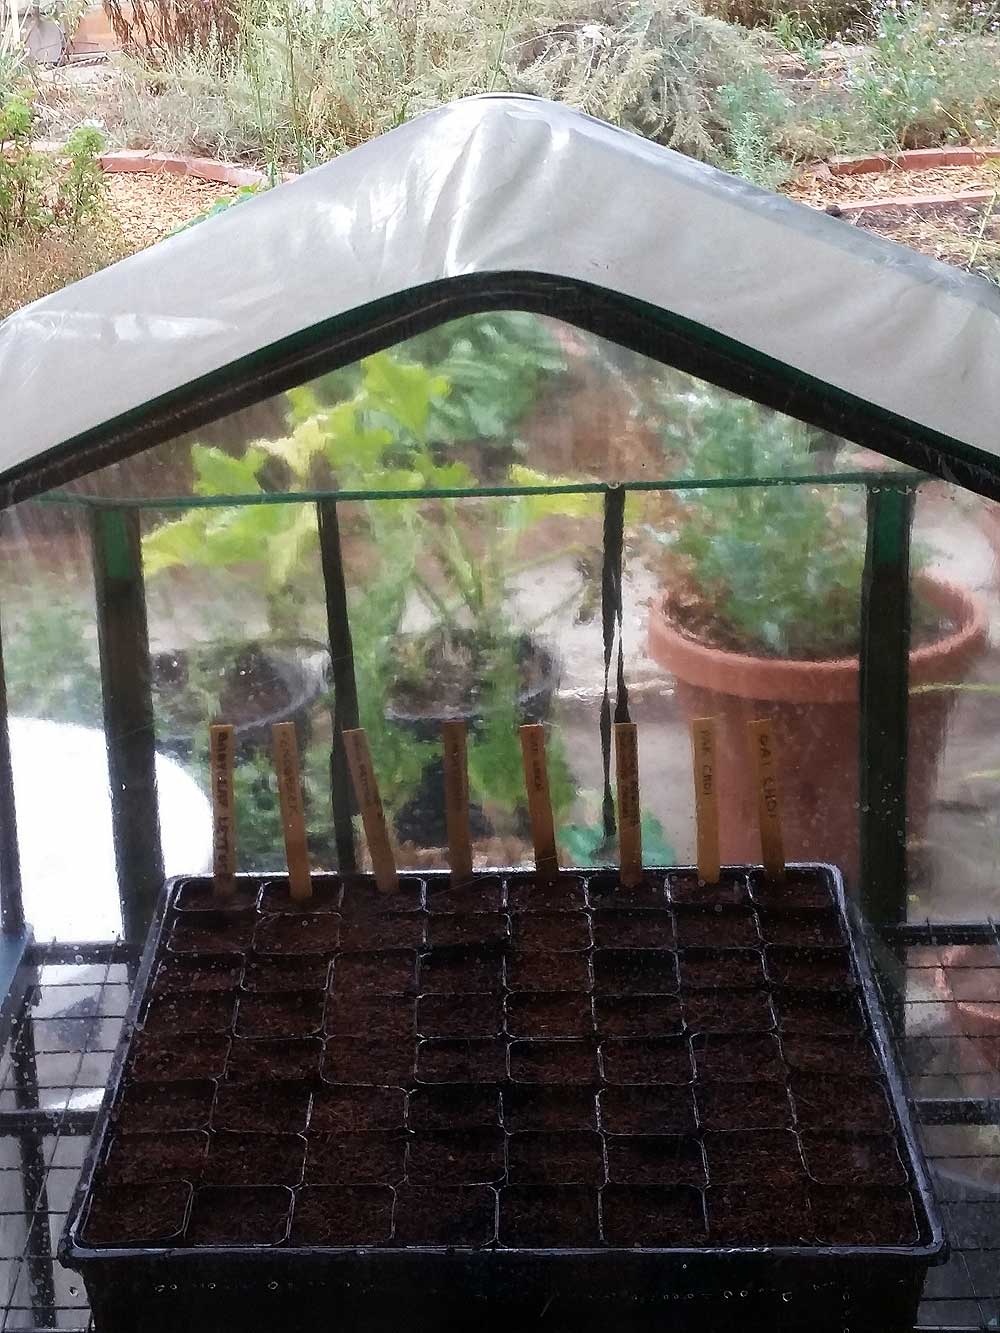 Flat in small greenhouse